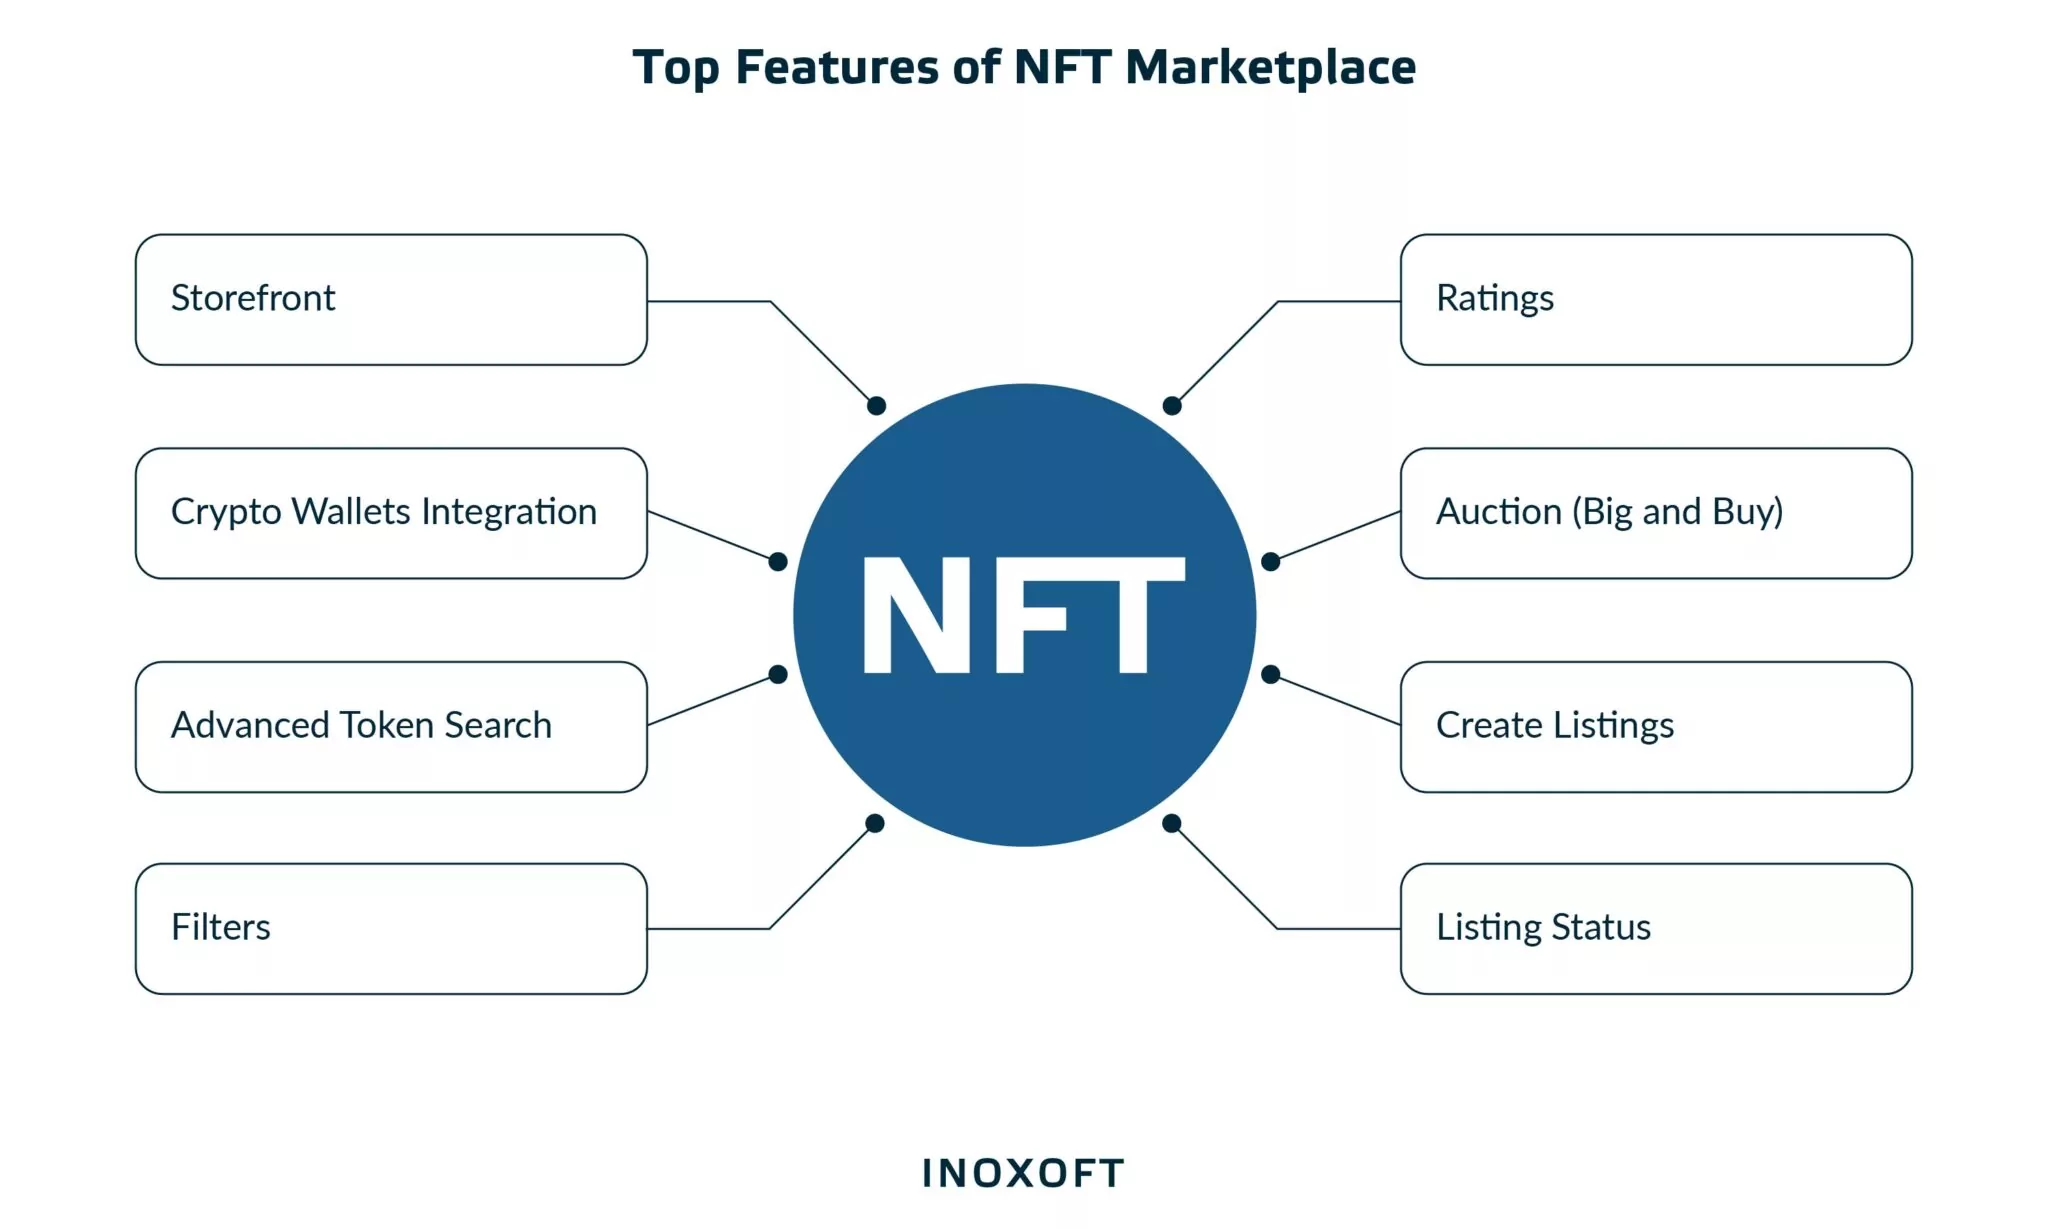 Top features of NFT marketplace